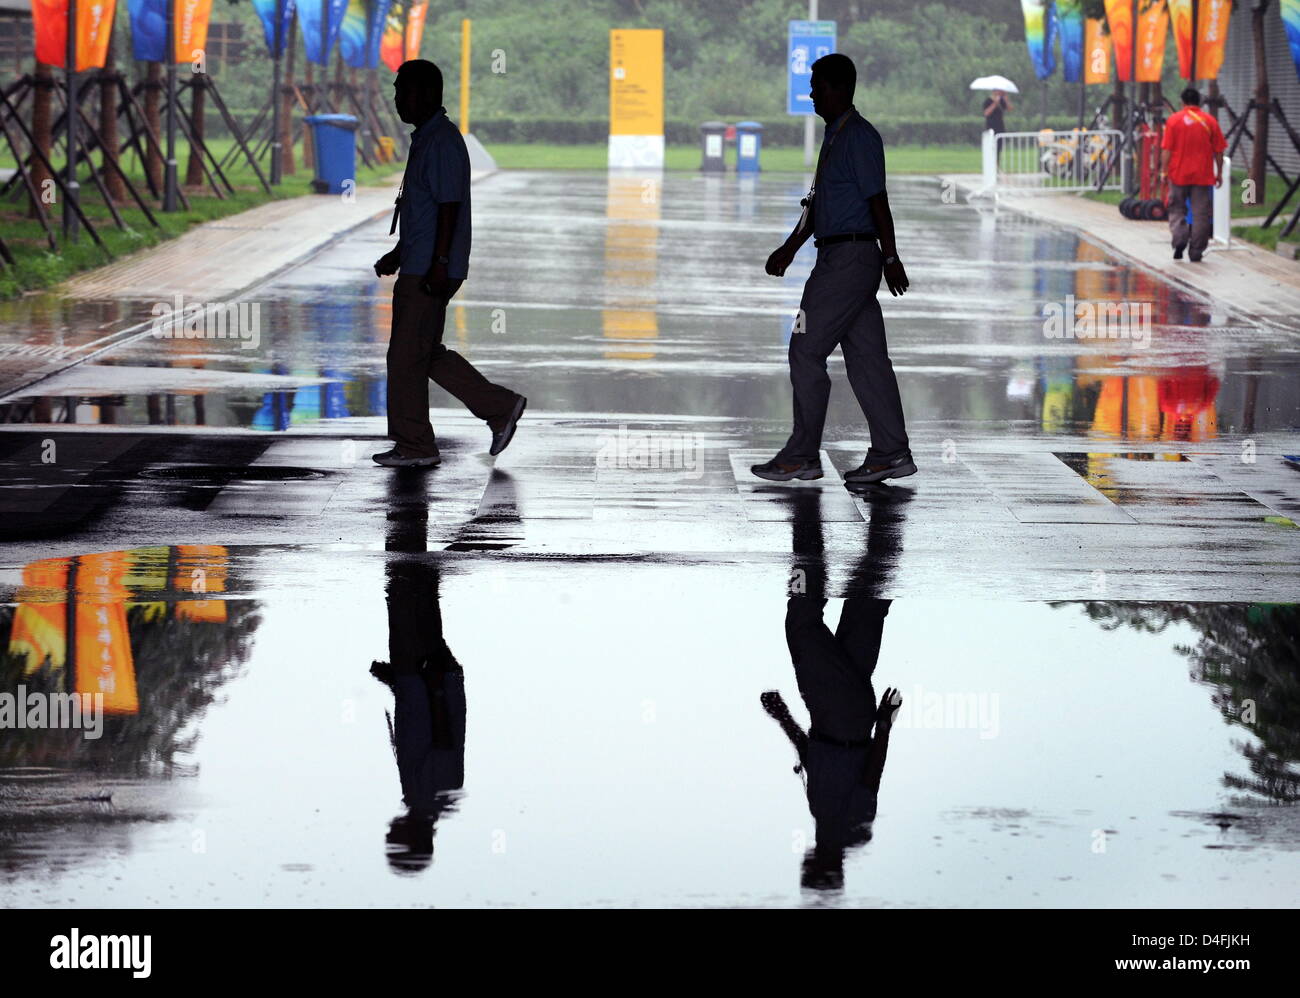 The shadows of officials crossing a street are reflected in a puddle at the Olympic Green Tennis Center during a rain delay in Beijing during the Beijing 2008 Olympic Games at the National Aquatics Center in Beijing, China 10 August 2008. The 1st round match mens single tennis match of Nicolas Kiefer from Germany and Max Mirnyi from Belarus is unhold because of heavy rain. Photo: K Stock Photo